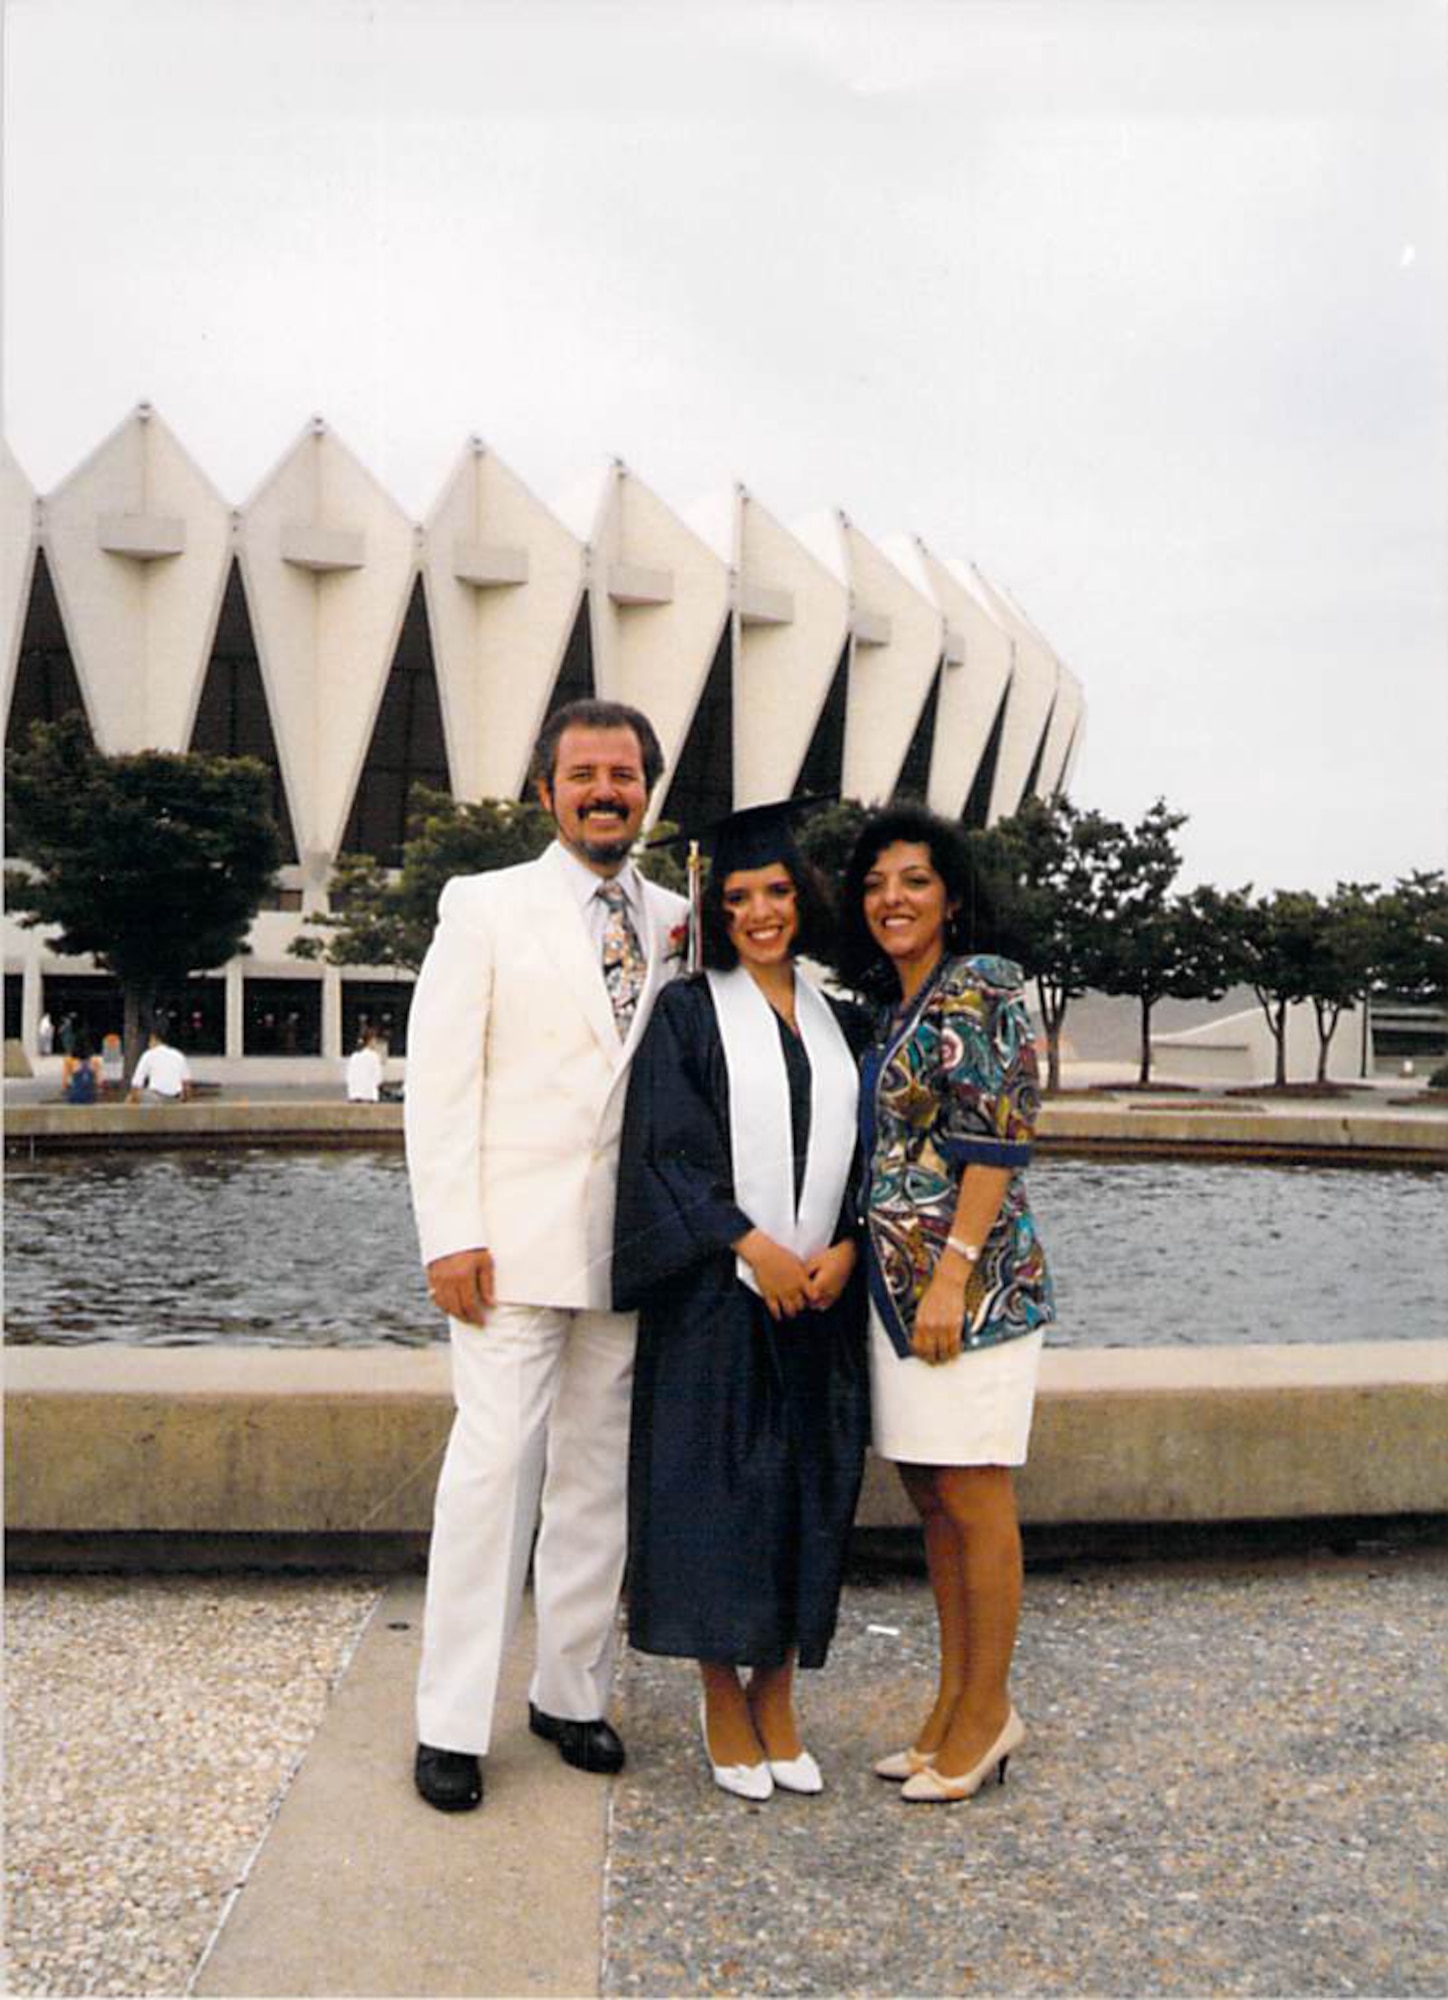 Master Sgt. Liesbeth Bowen (center) stands with her father, Roberto Henriquez, and mother, Liliana Henriquez, while celebrating her college graduation at the Hampton Coliseum in Hampton, Va. Bowen,the  633rd Wing Staff Agency first sergeant, graduated in 1995. (Courtesy photo)